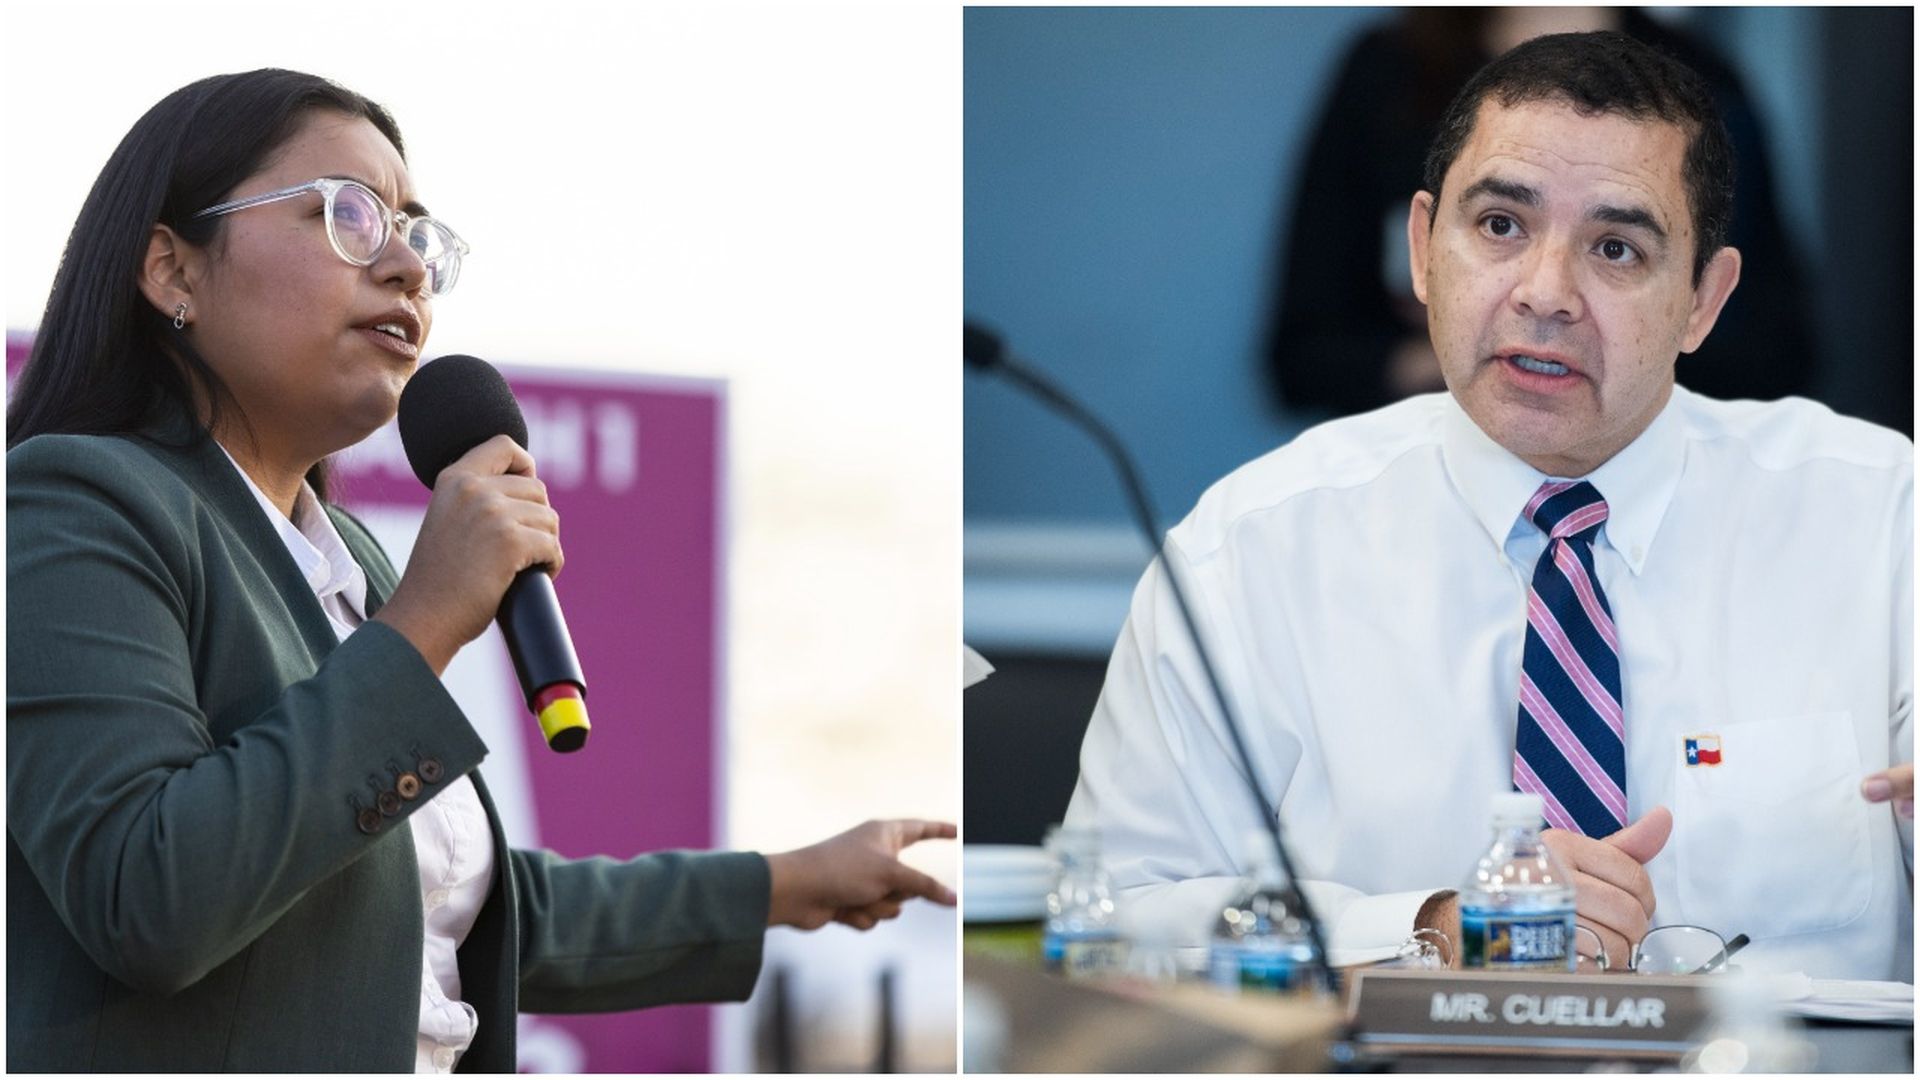 Jessica Cisneros is facing off against Henry Cuellar in a South Texas Democratic congressional primary